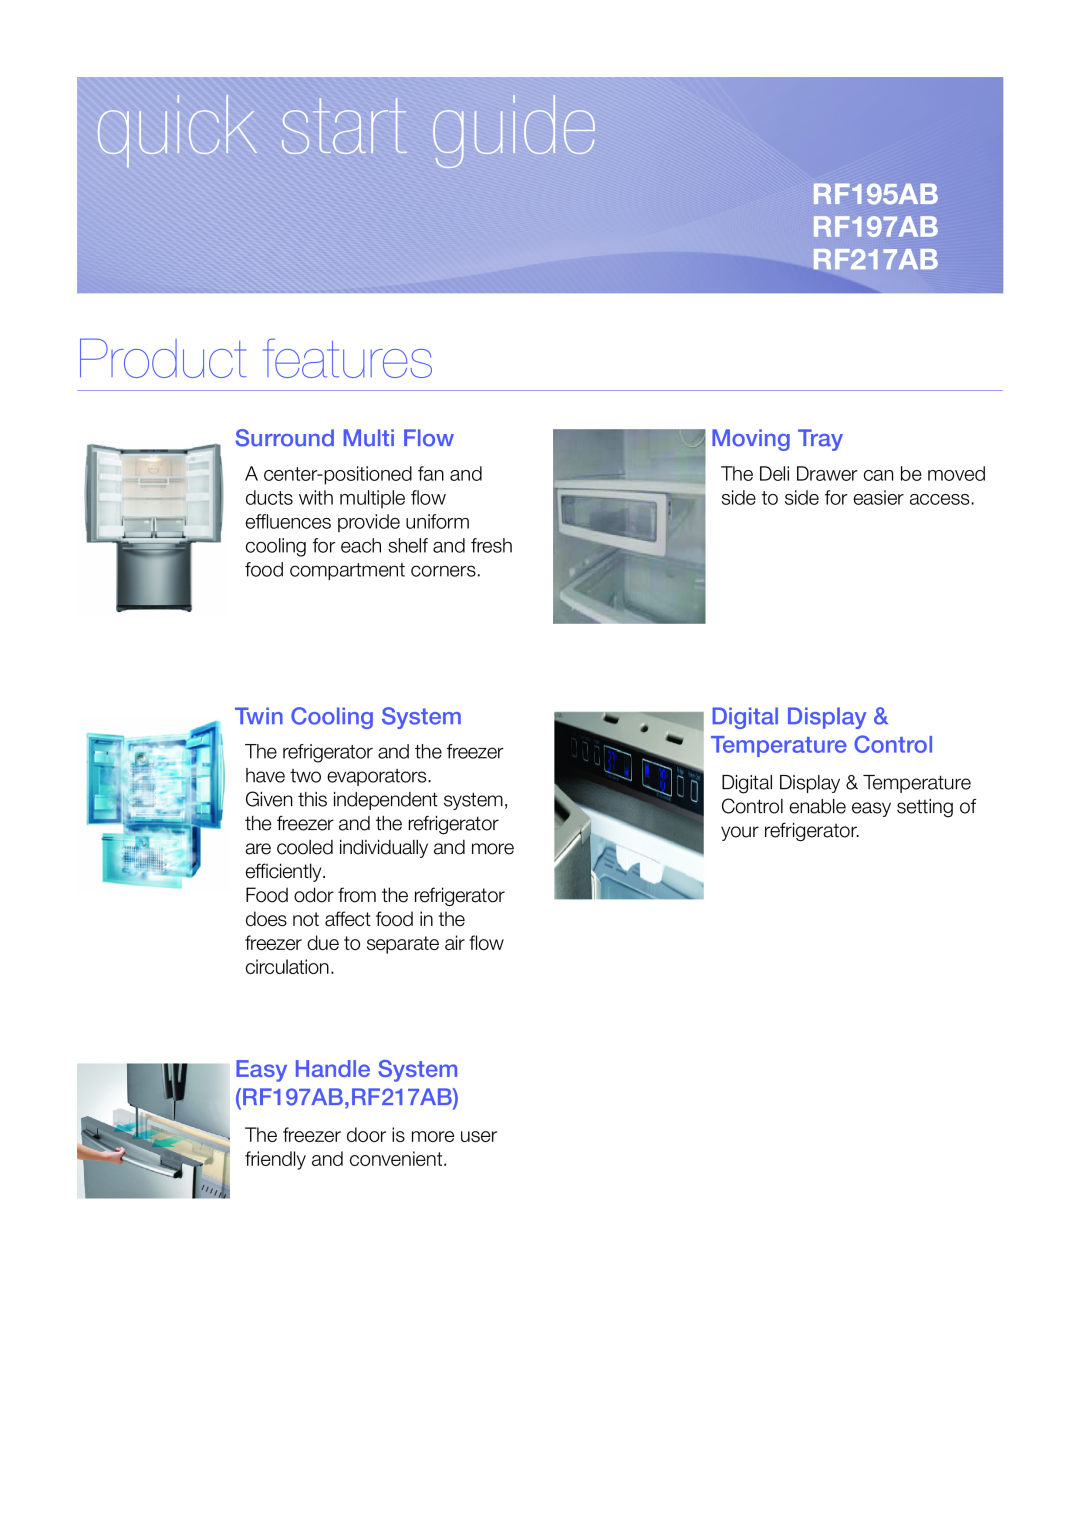 Samsung RF197AB quick start Product features, Surround Multi Flow, Moving Tray, Twin Cooling System, quick start guide 